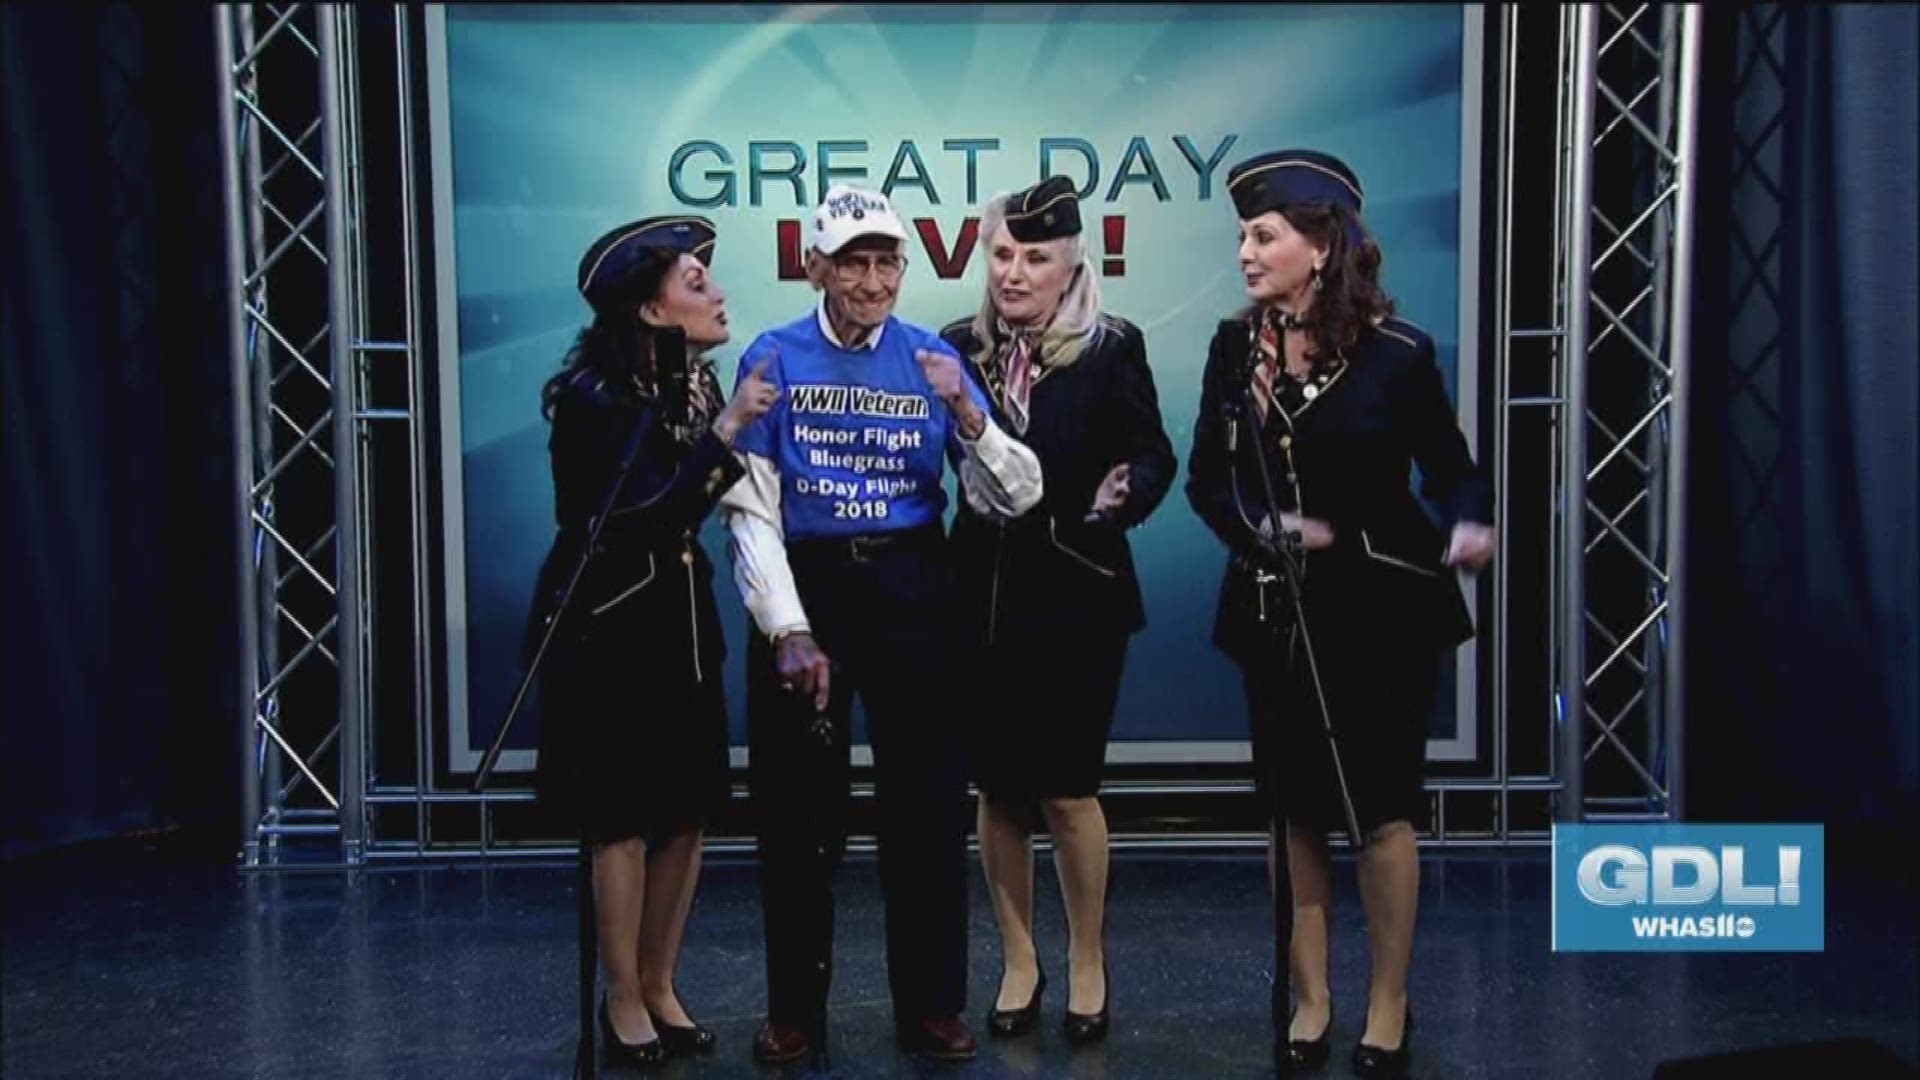 The Ladies For Liberty stopped by Great Day Live to perform some songs with special guest Ernie Micka, who turned 101 years old.